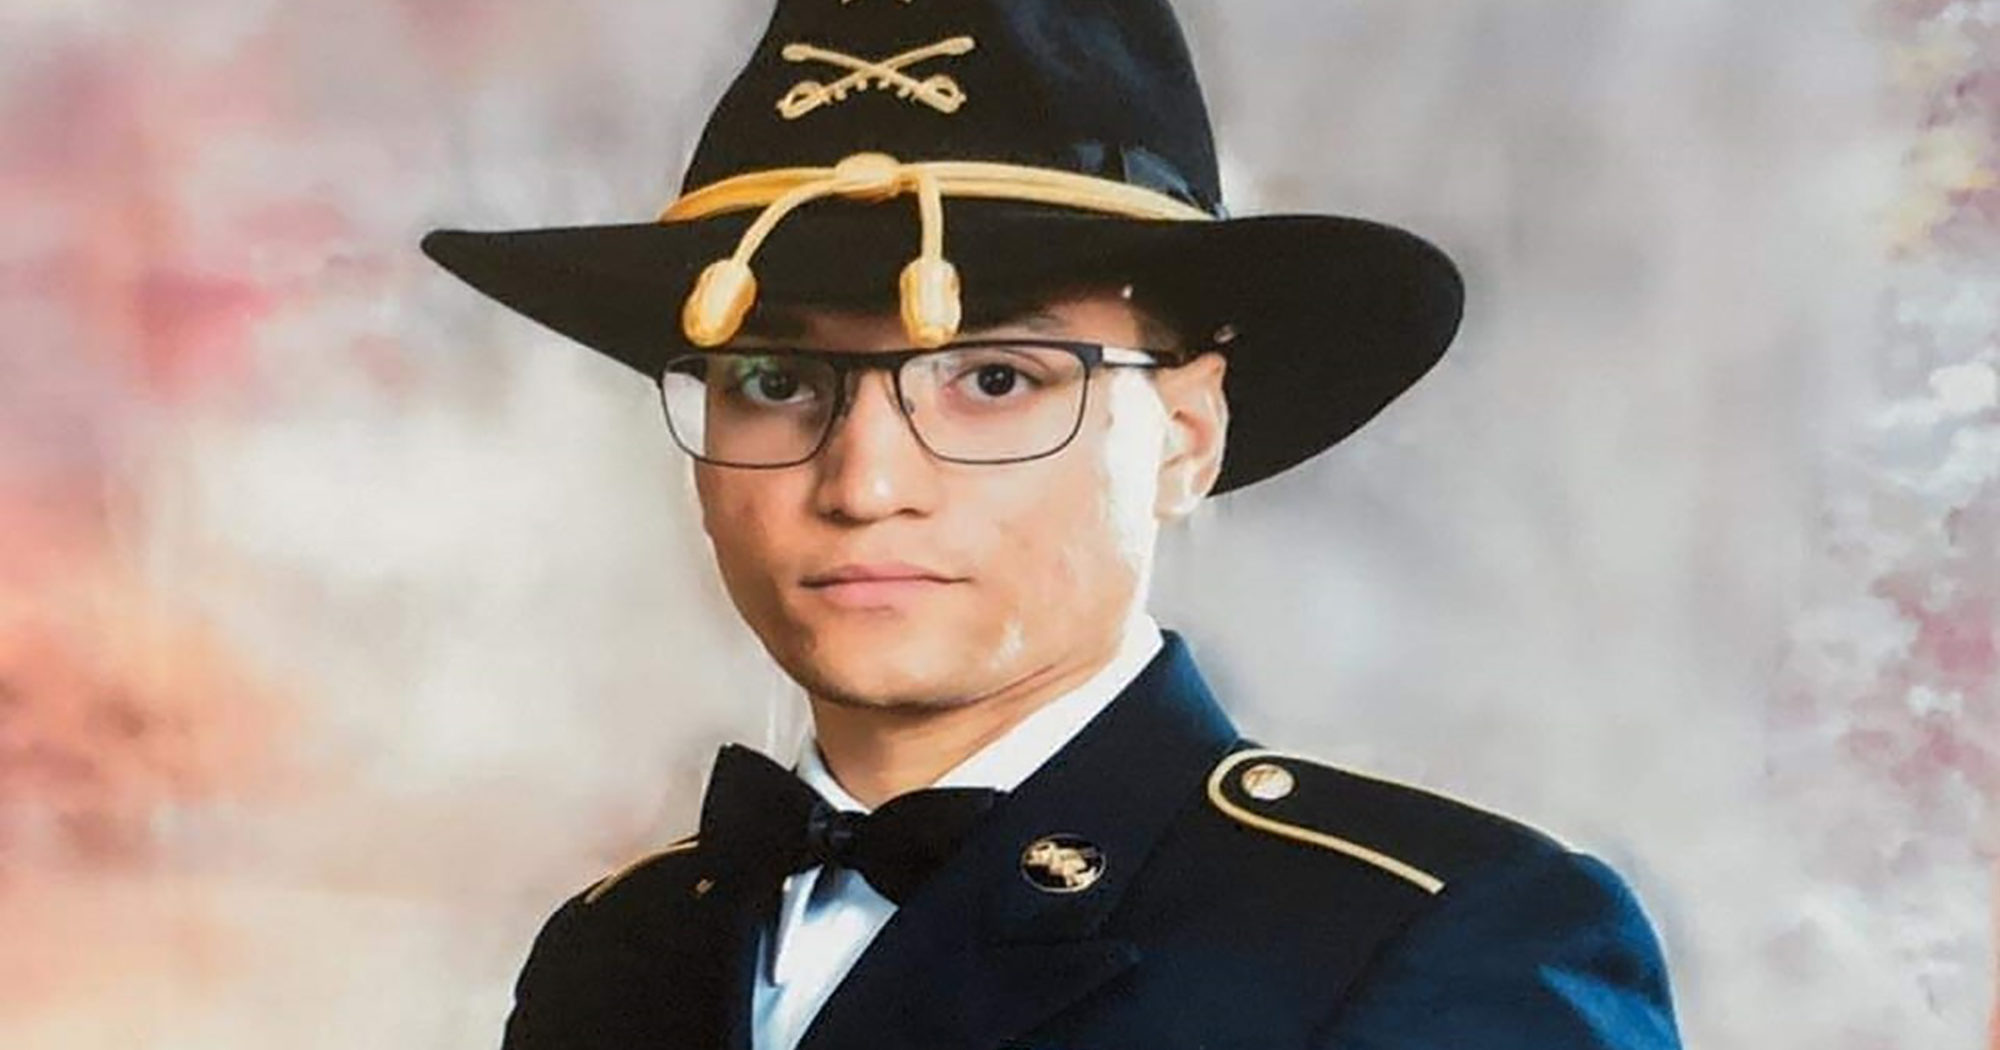 This file photo provided by the U.S. Army shows Sgt. Elder Fernandes. Police said on Aug. 25, 2020, that a body found near Fort Hood, Texas, is likely that of Fernandes. Fernandes is the third soldier from Fort Hood to go missing in the past year.